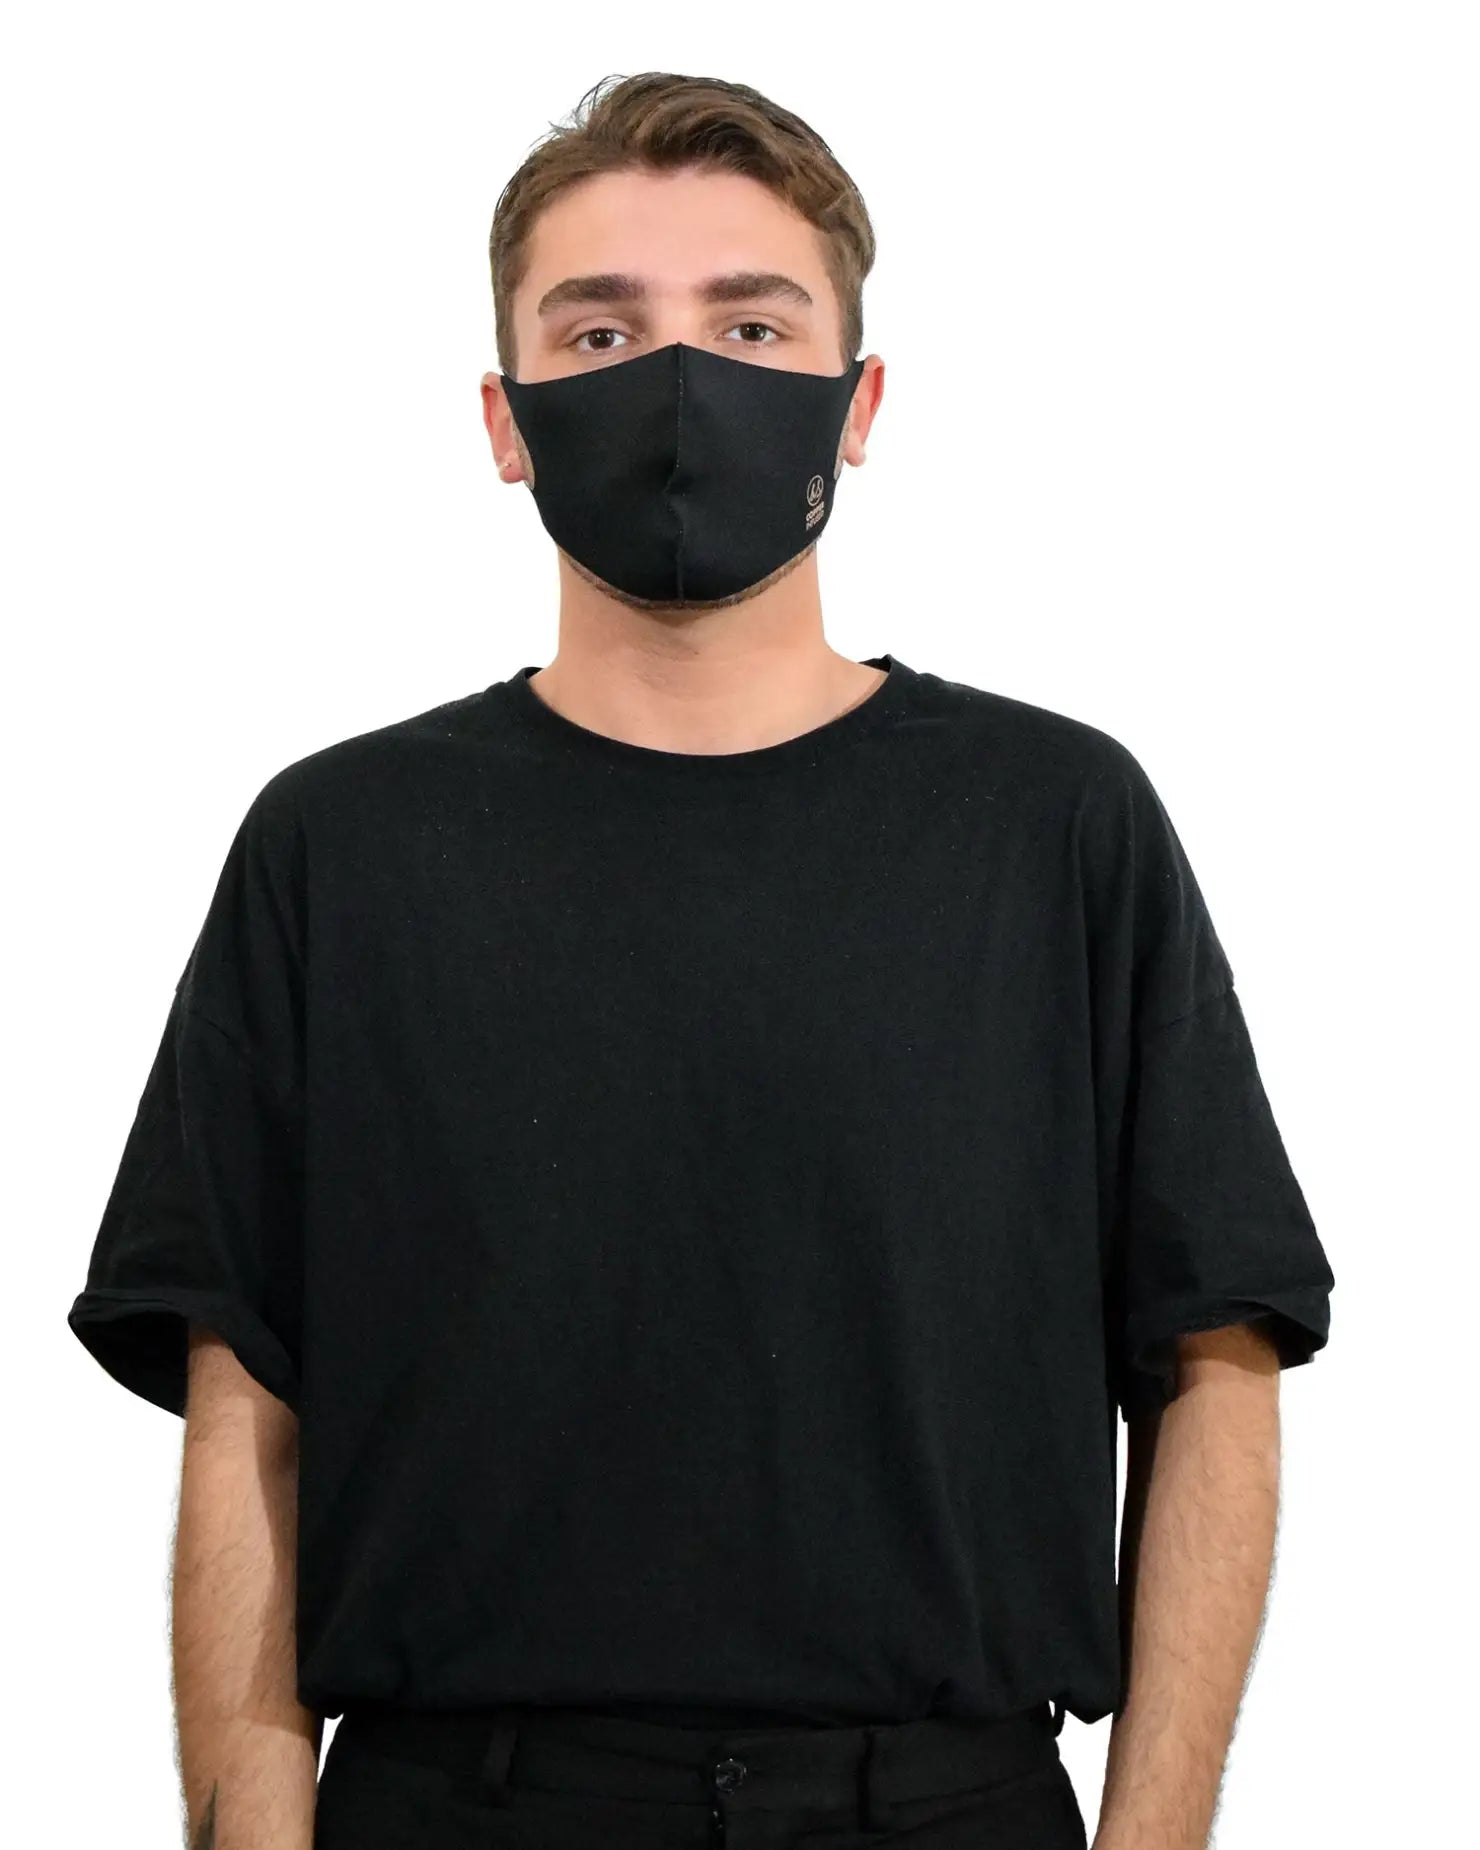 Man wearing black mask in 3D Copper-Infused Face Mask Covering for Stylish Protection.